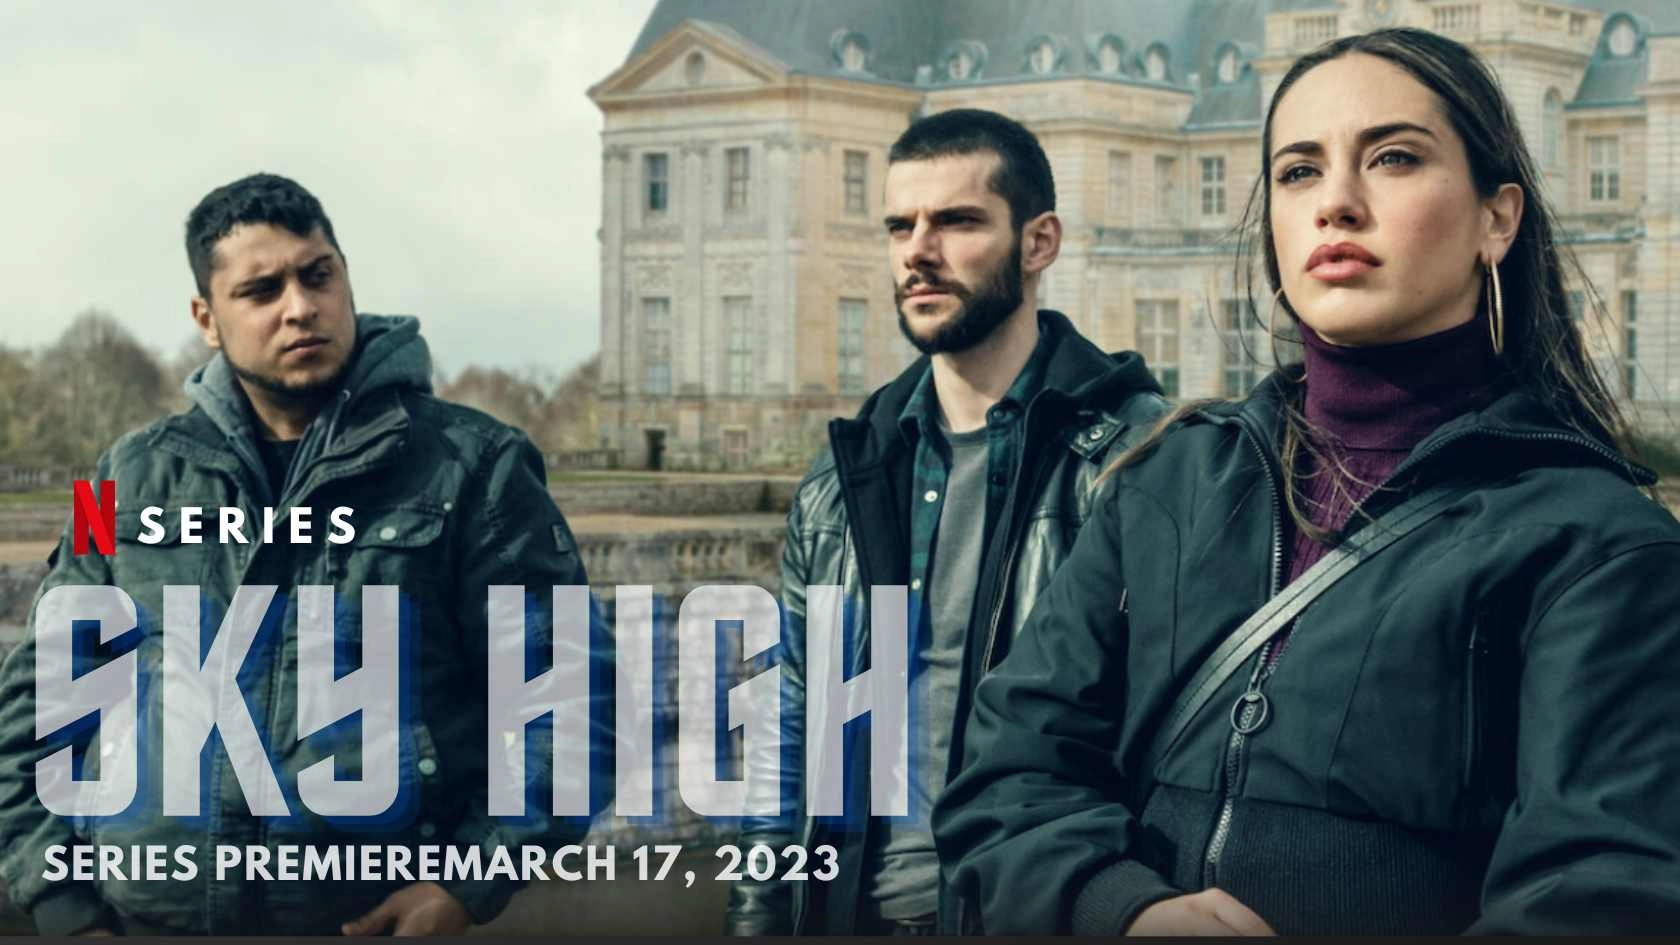 Sky High Parents Guide and Sky High Age Rating (2023)